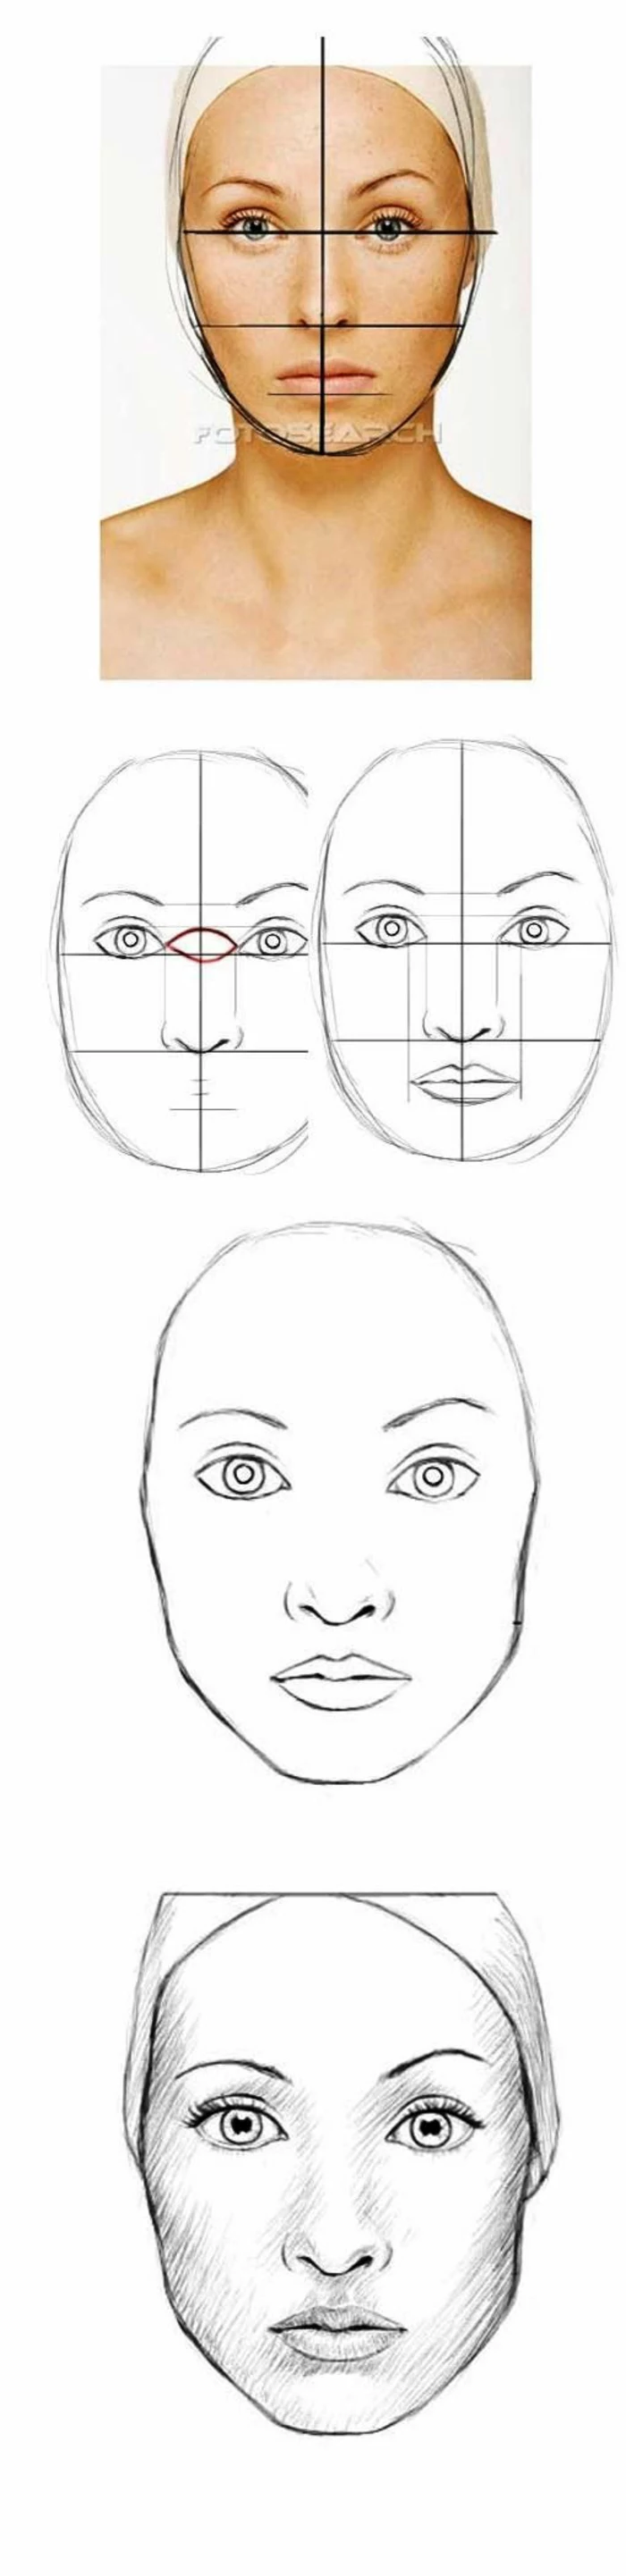 step by step tutorial, how to draw a cartoon person, how to draw a face